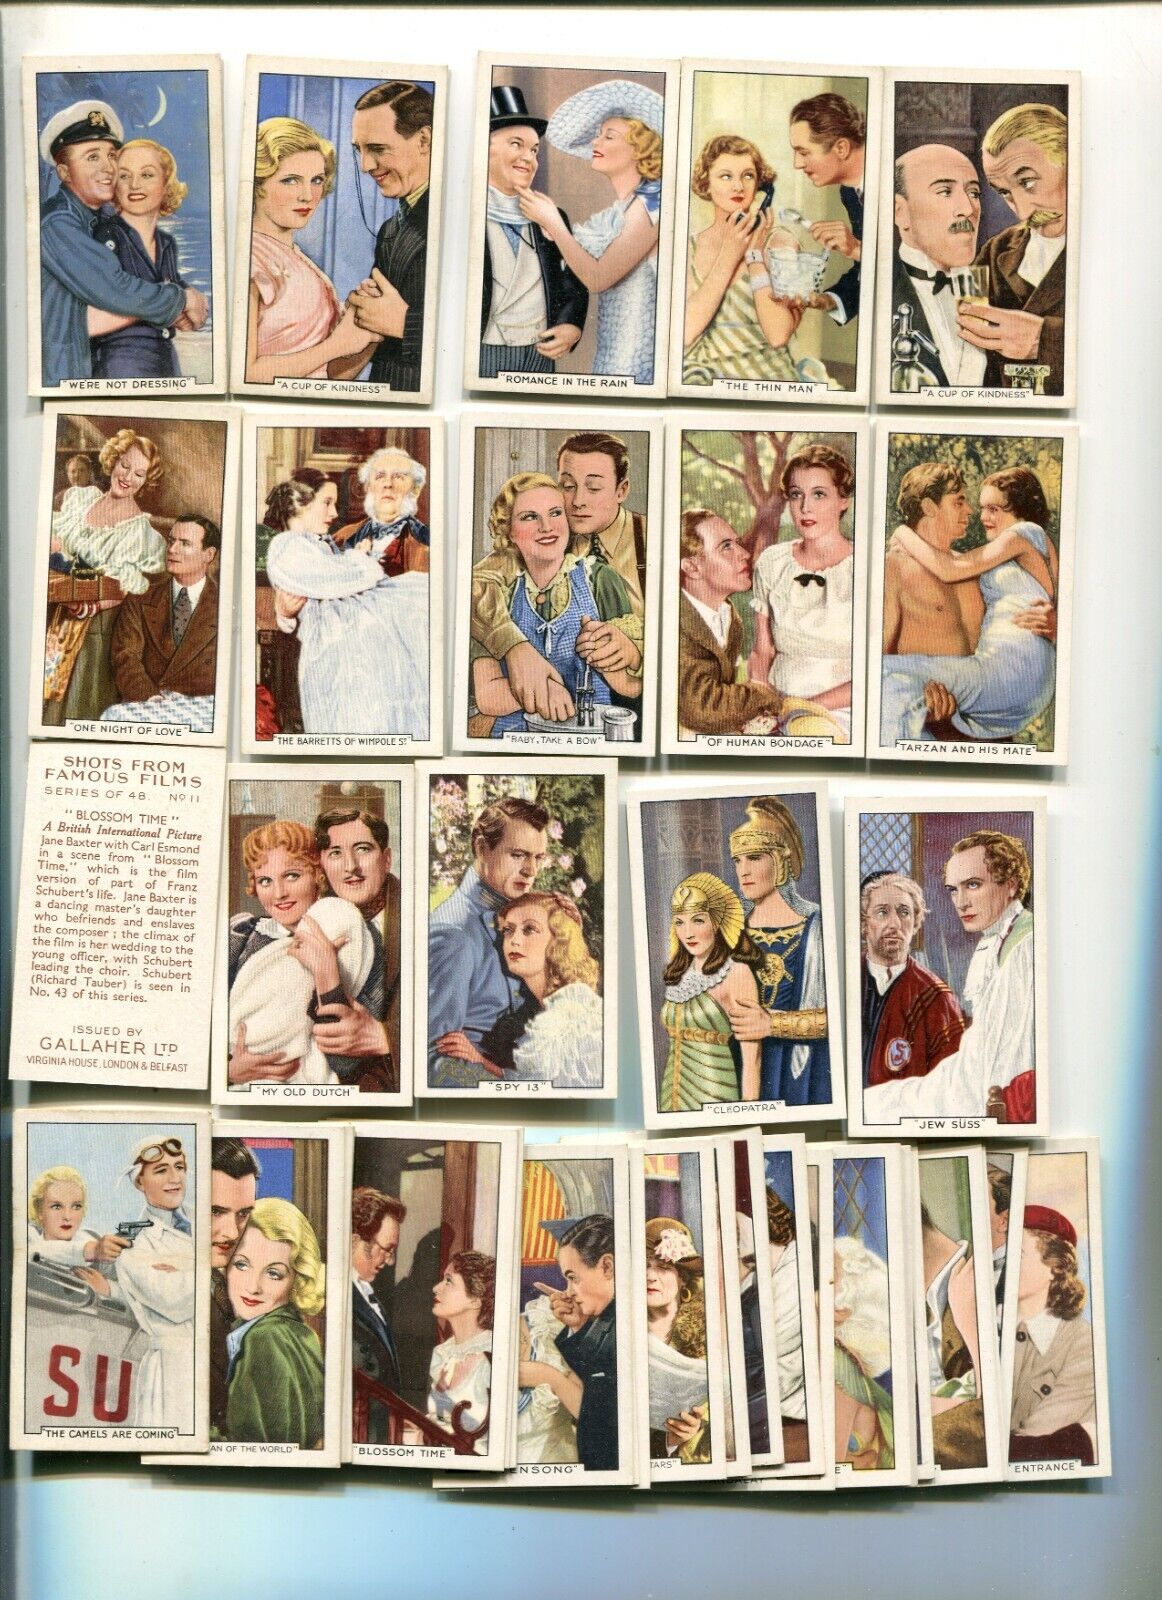 1935 GALLAHER LTD SHOTS FROM FAMOUS FILMS 48 DIFFERENT TOBACCO CARD SET